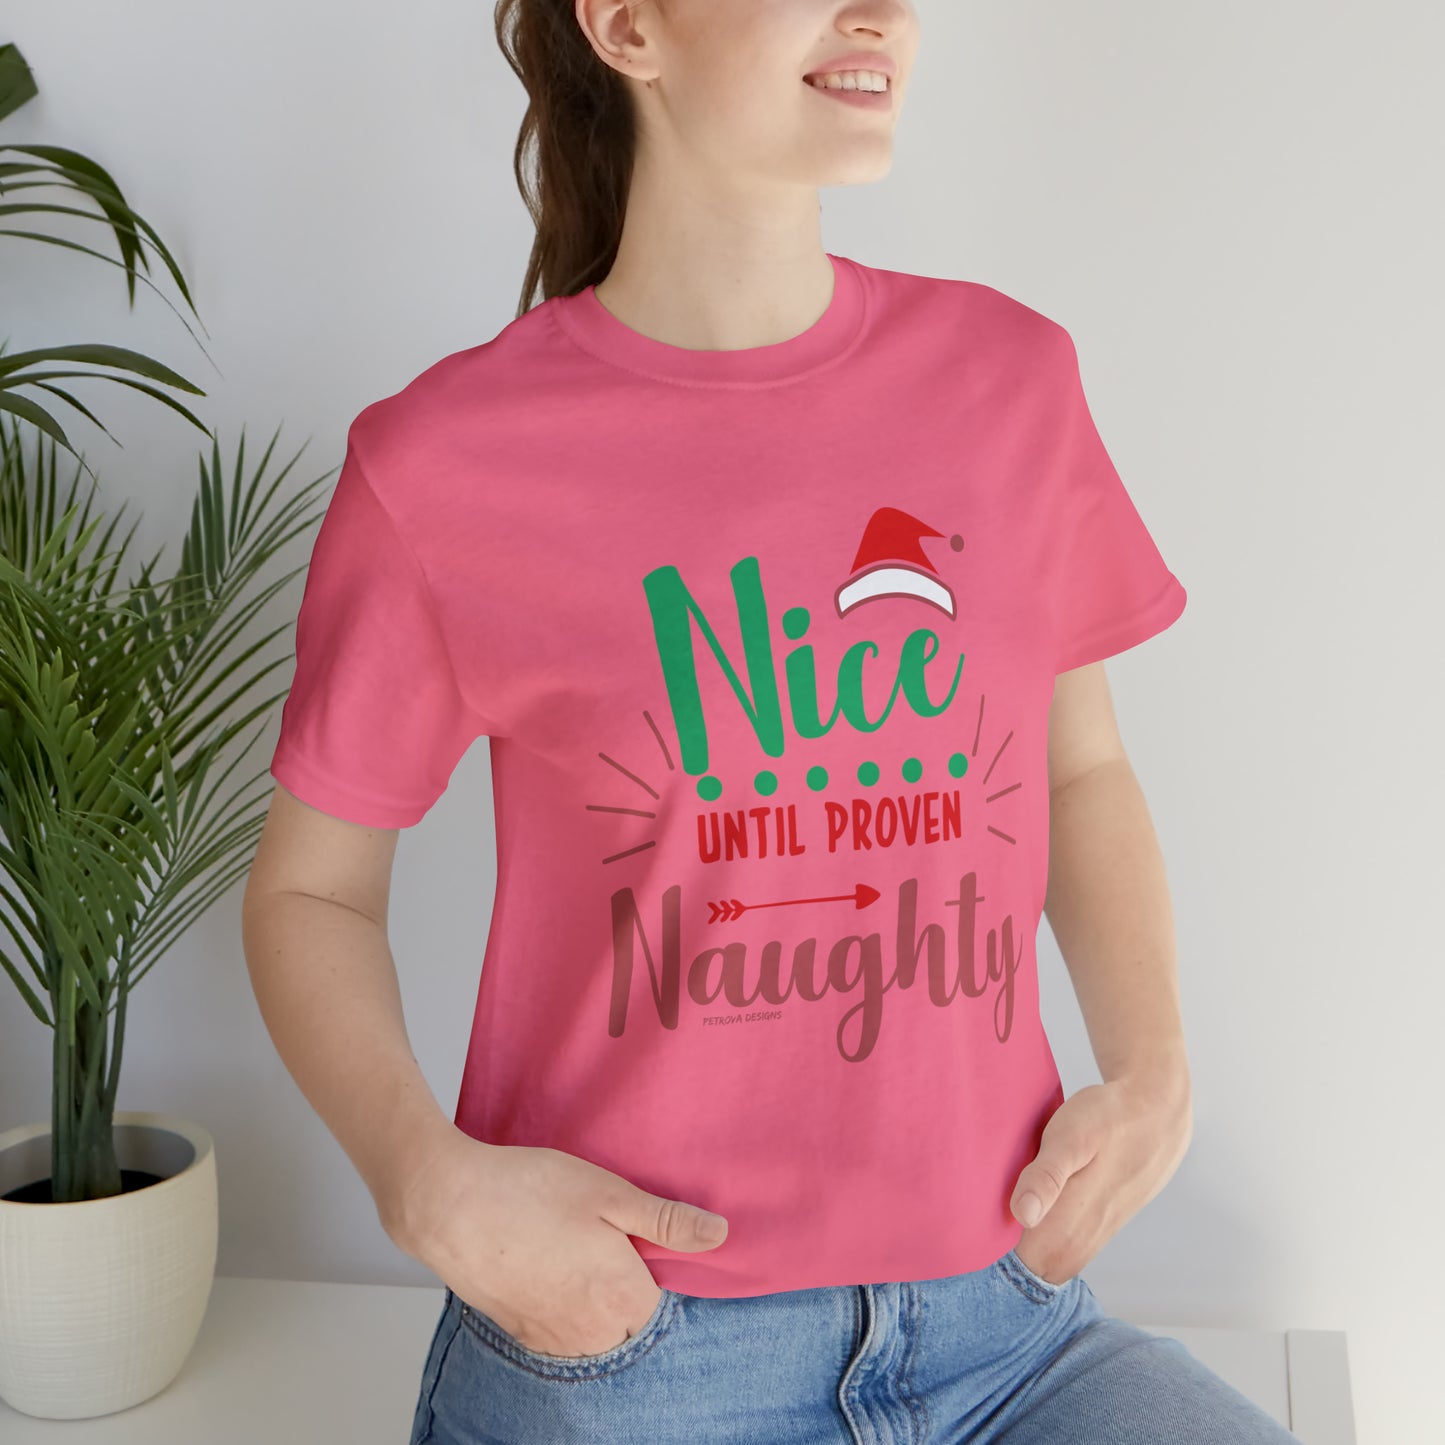 Charity Pink T-Shirt Tshirt Design Gift for Friend and Family Short Sleeved Shirt Christmas Petrova Designs